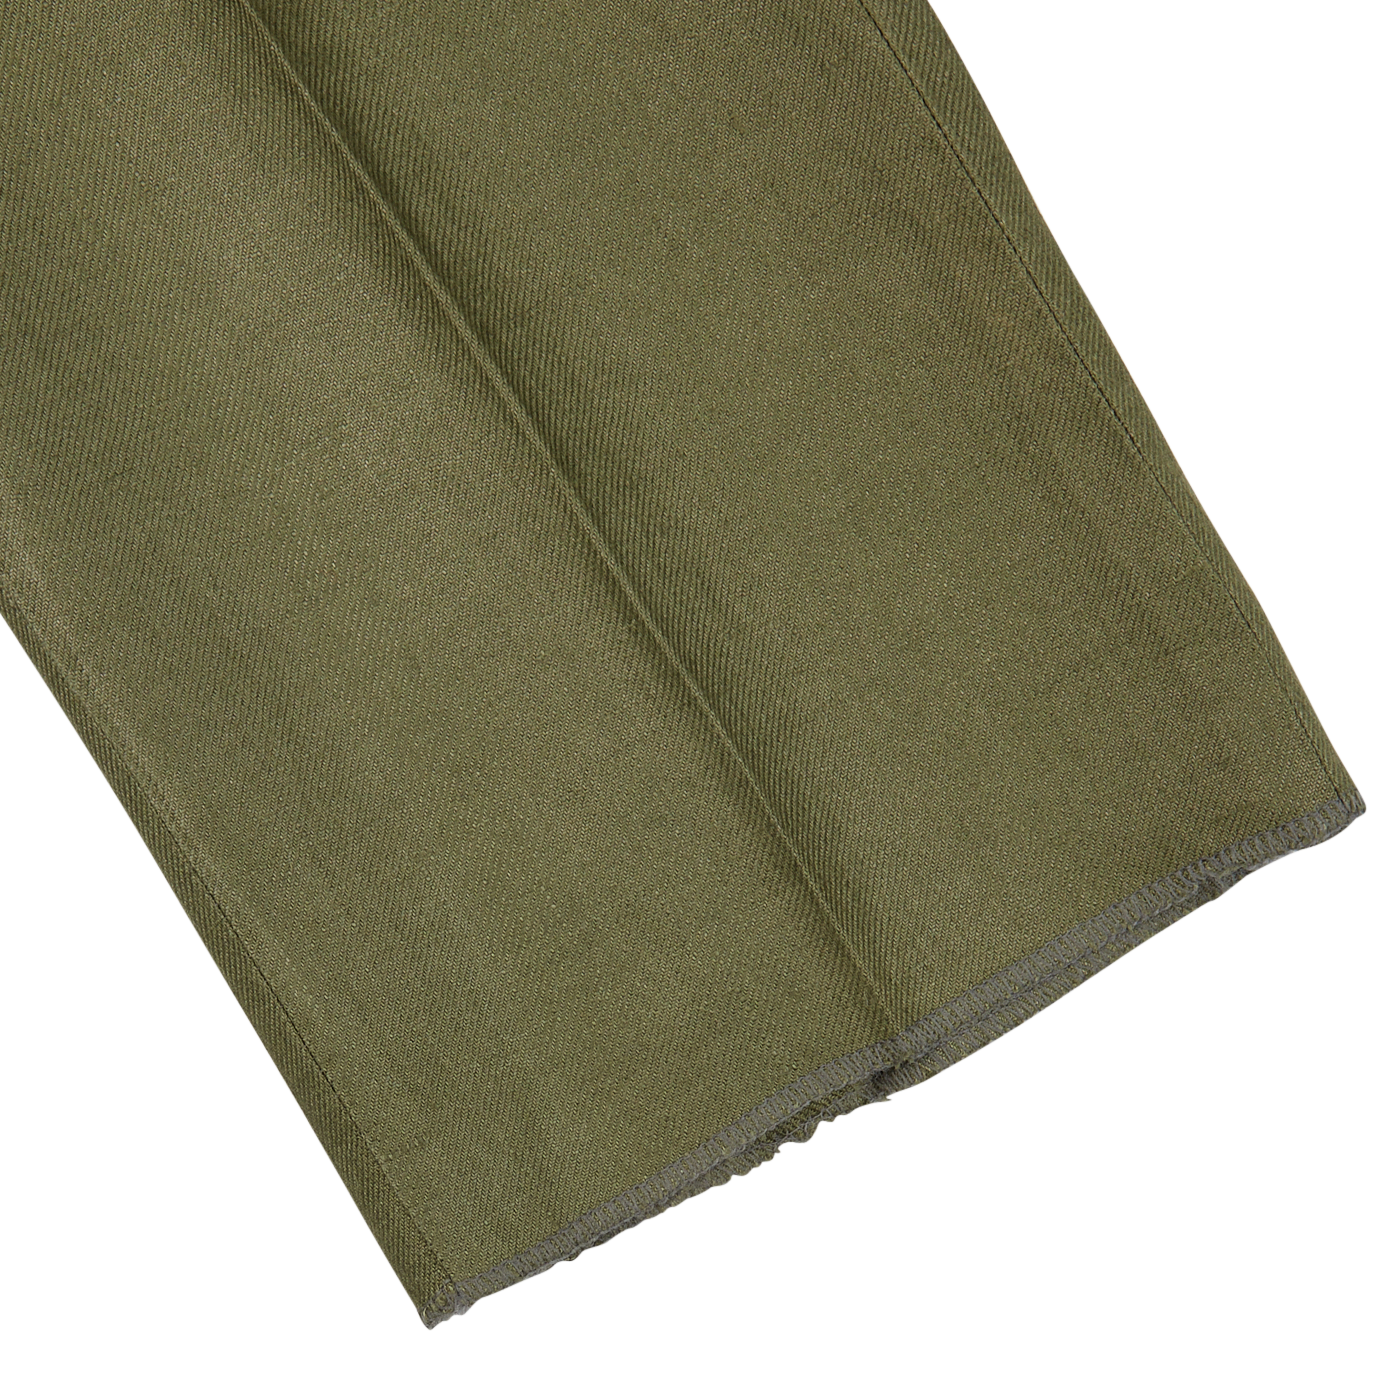 Olive green linen fabric with a clean-cut edge and frayed corner against a white background.